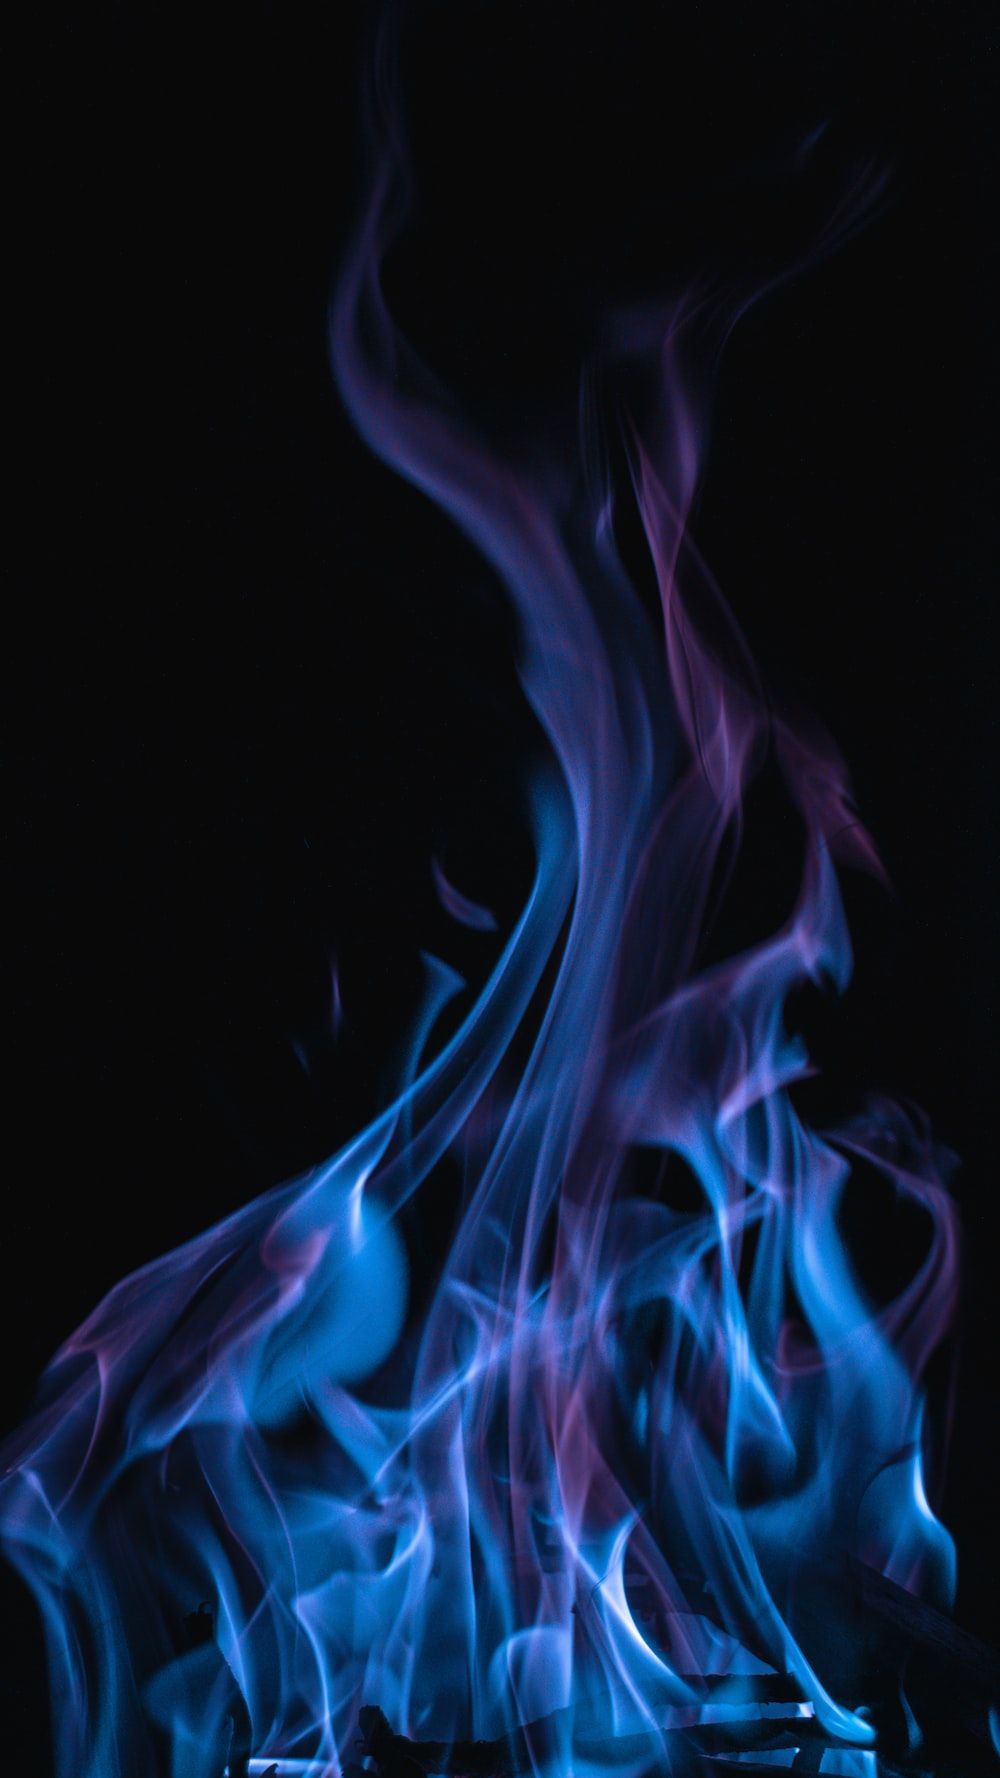 A blue and purple fire on a black background - Flames, fire